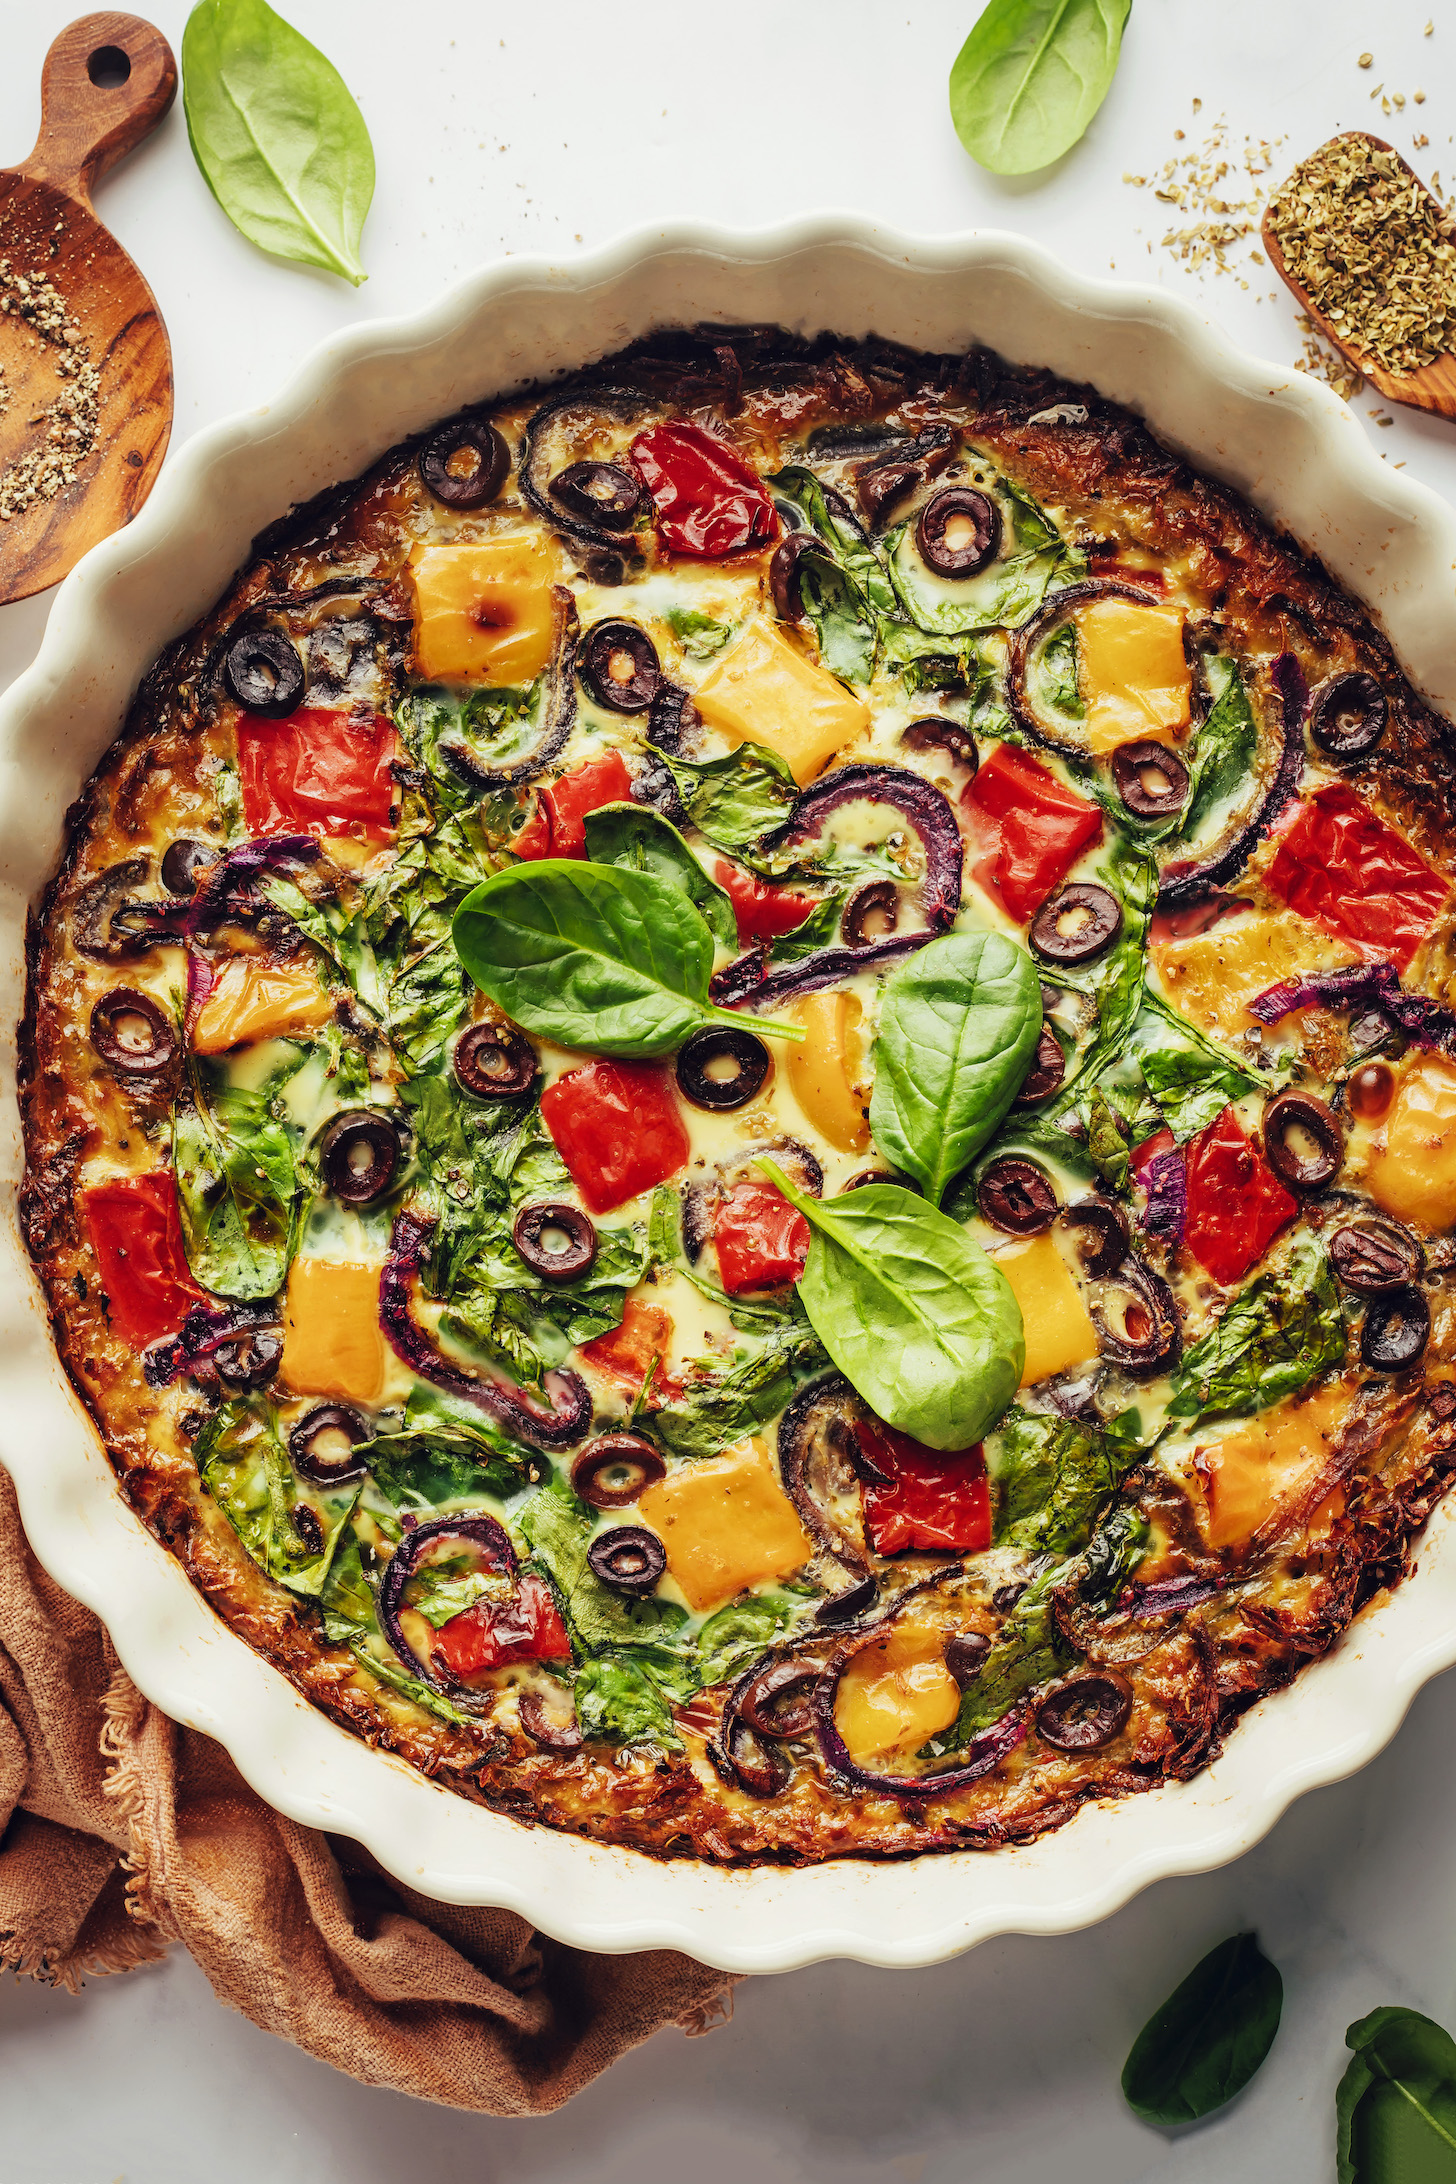 Mediterranean quiche with bell peppers, onion, spinach, olives, and a potato crust